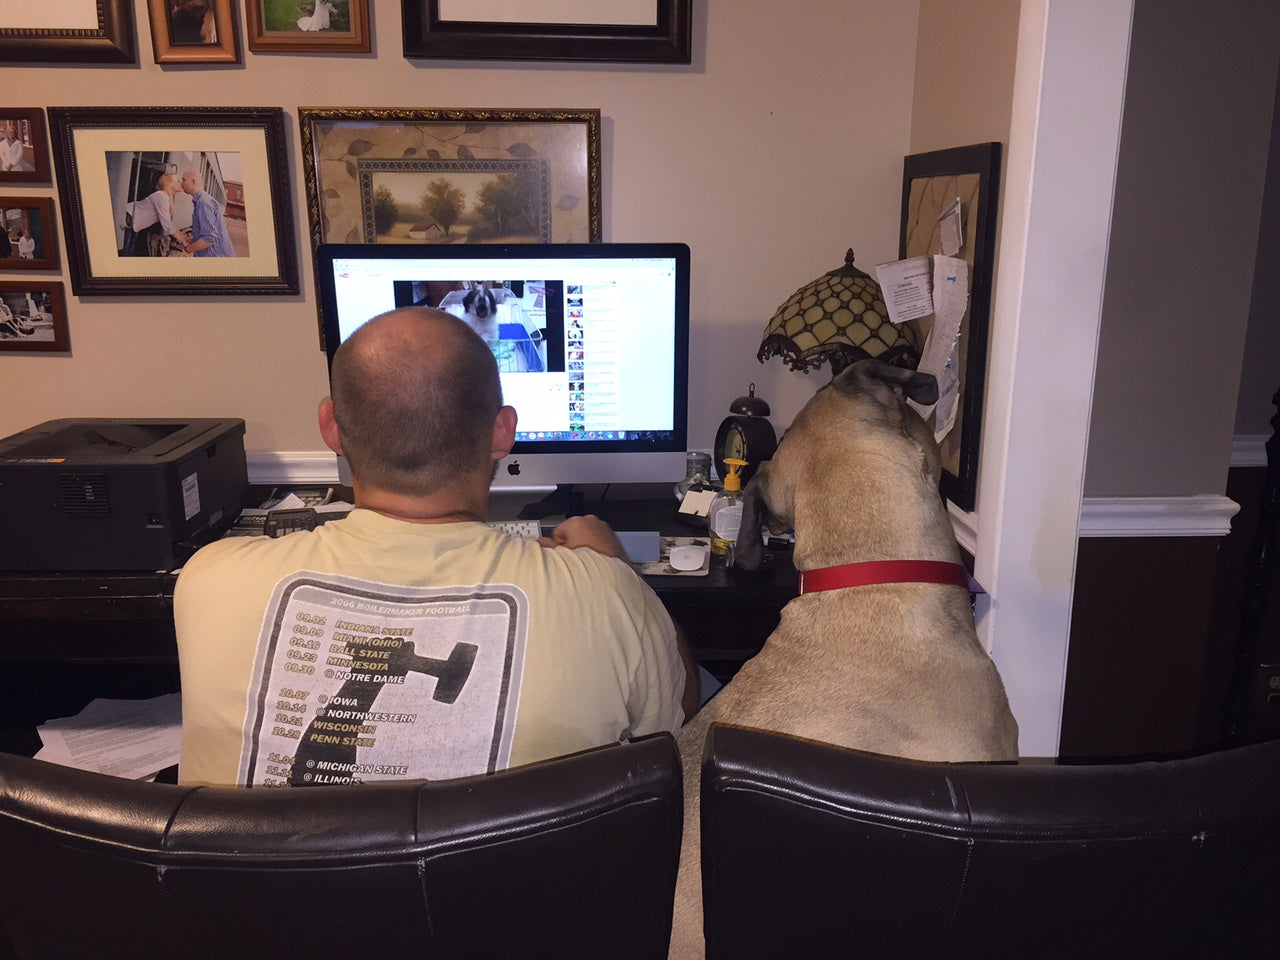 We're <dog> moms too - surfing the web